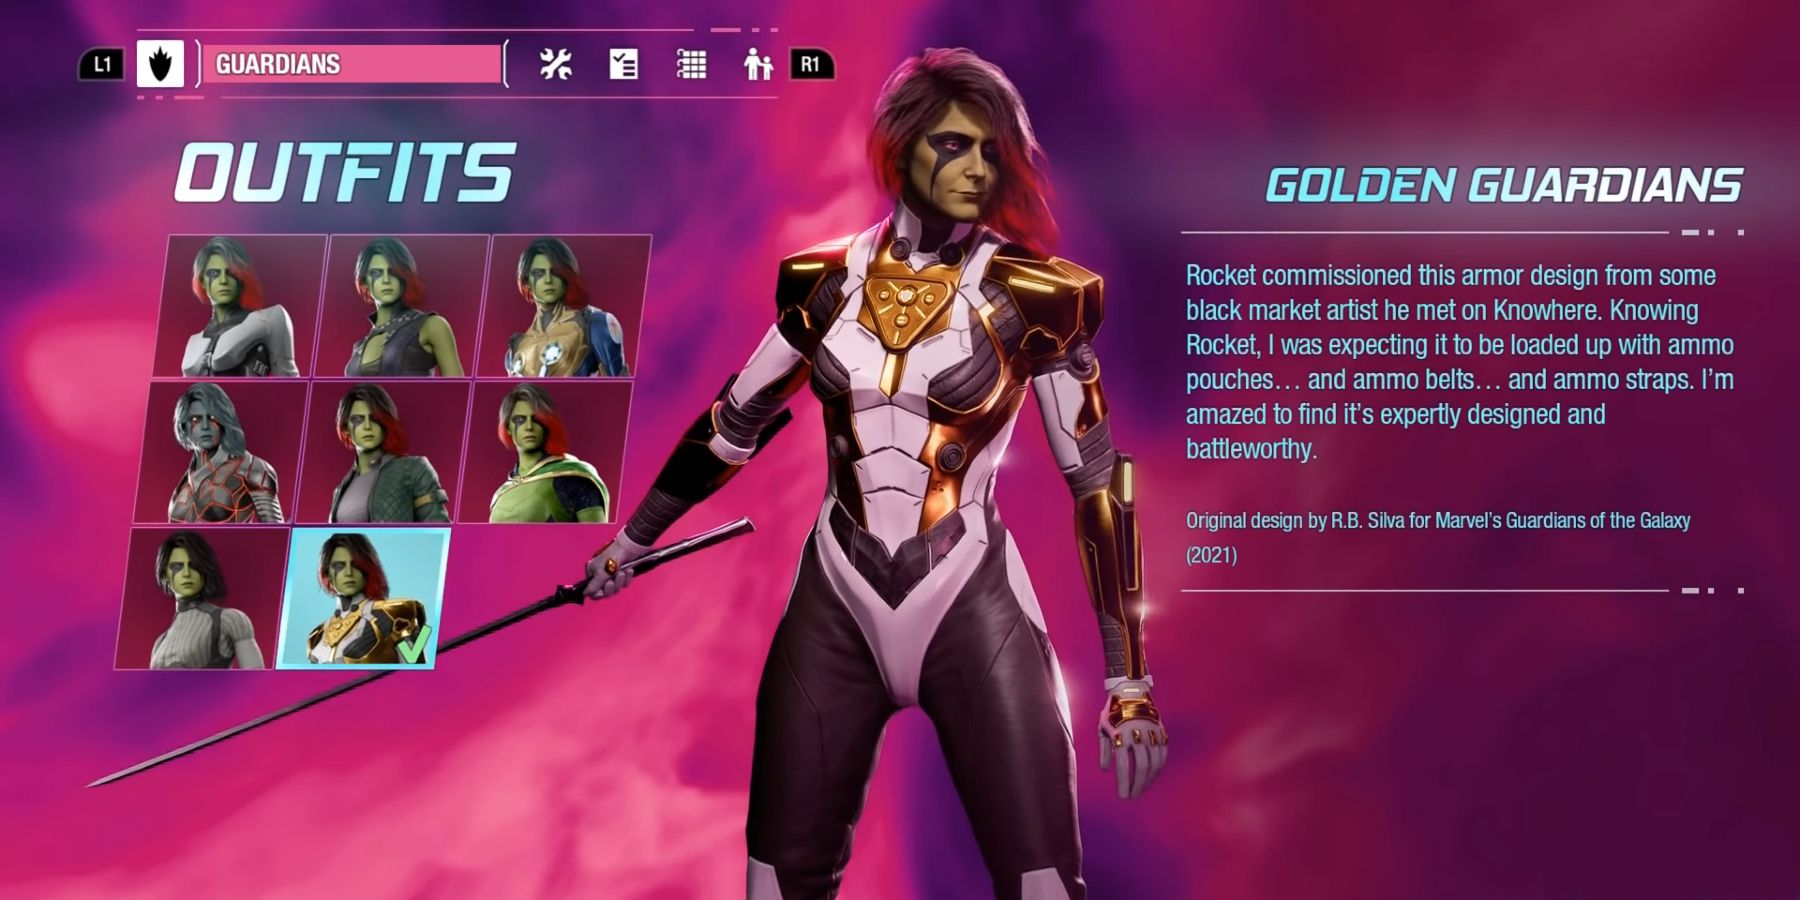 Gamora wearing her Golden Guardian outfit in Marvel's Guardians Of The Galaxy